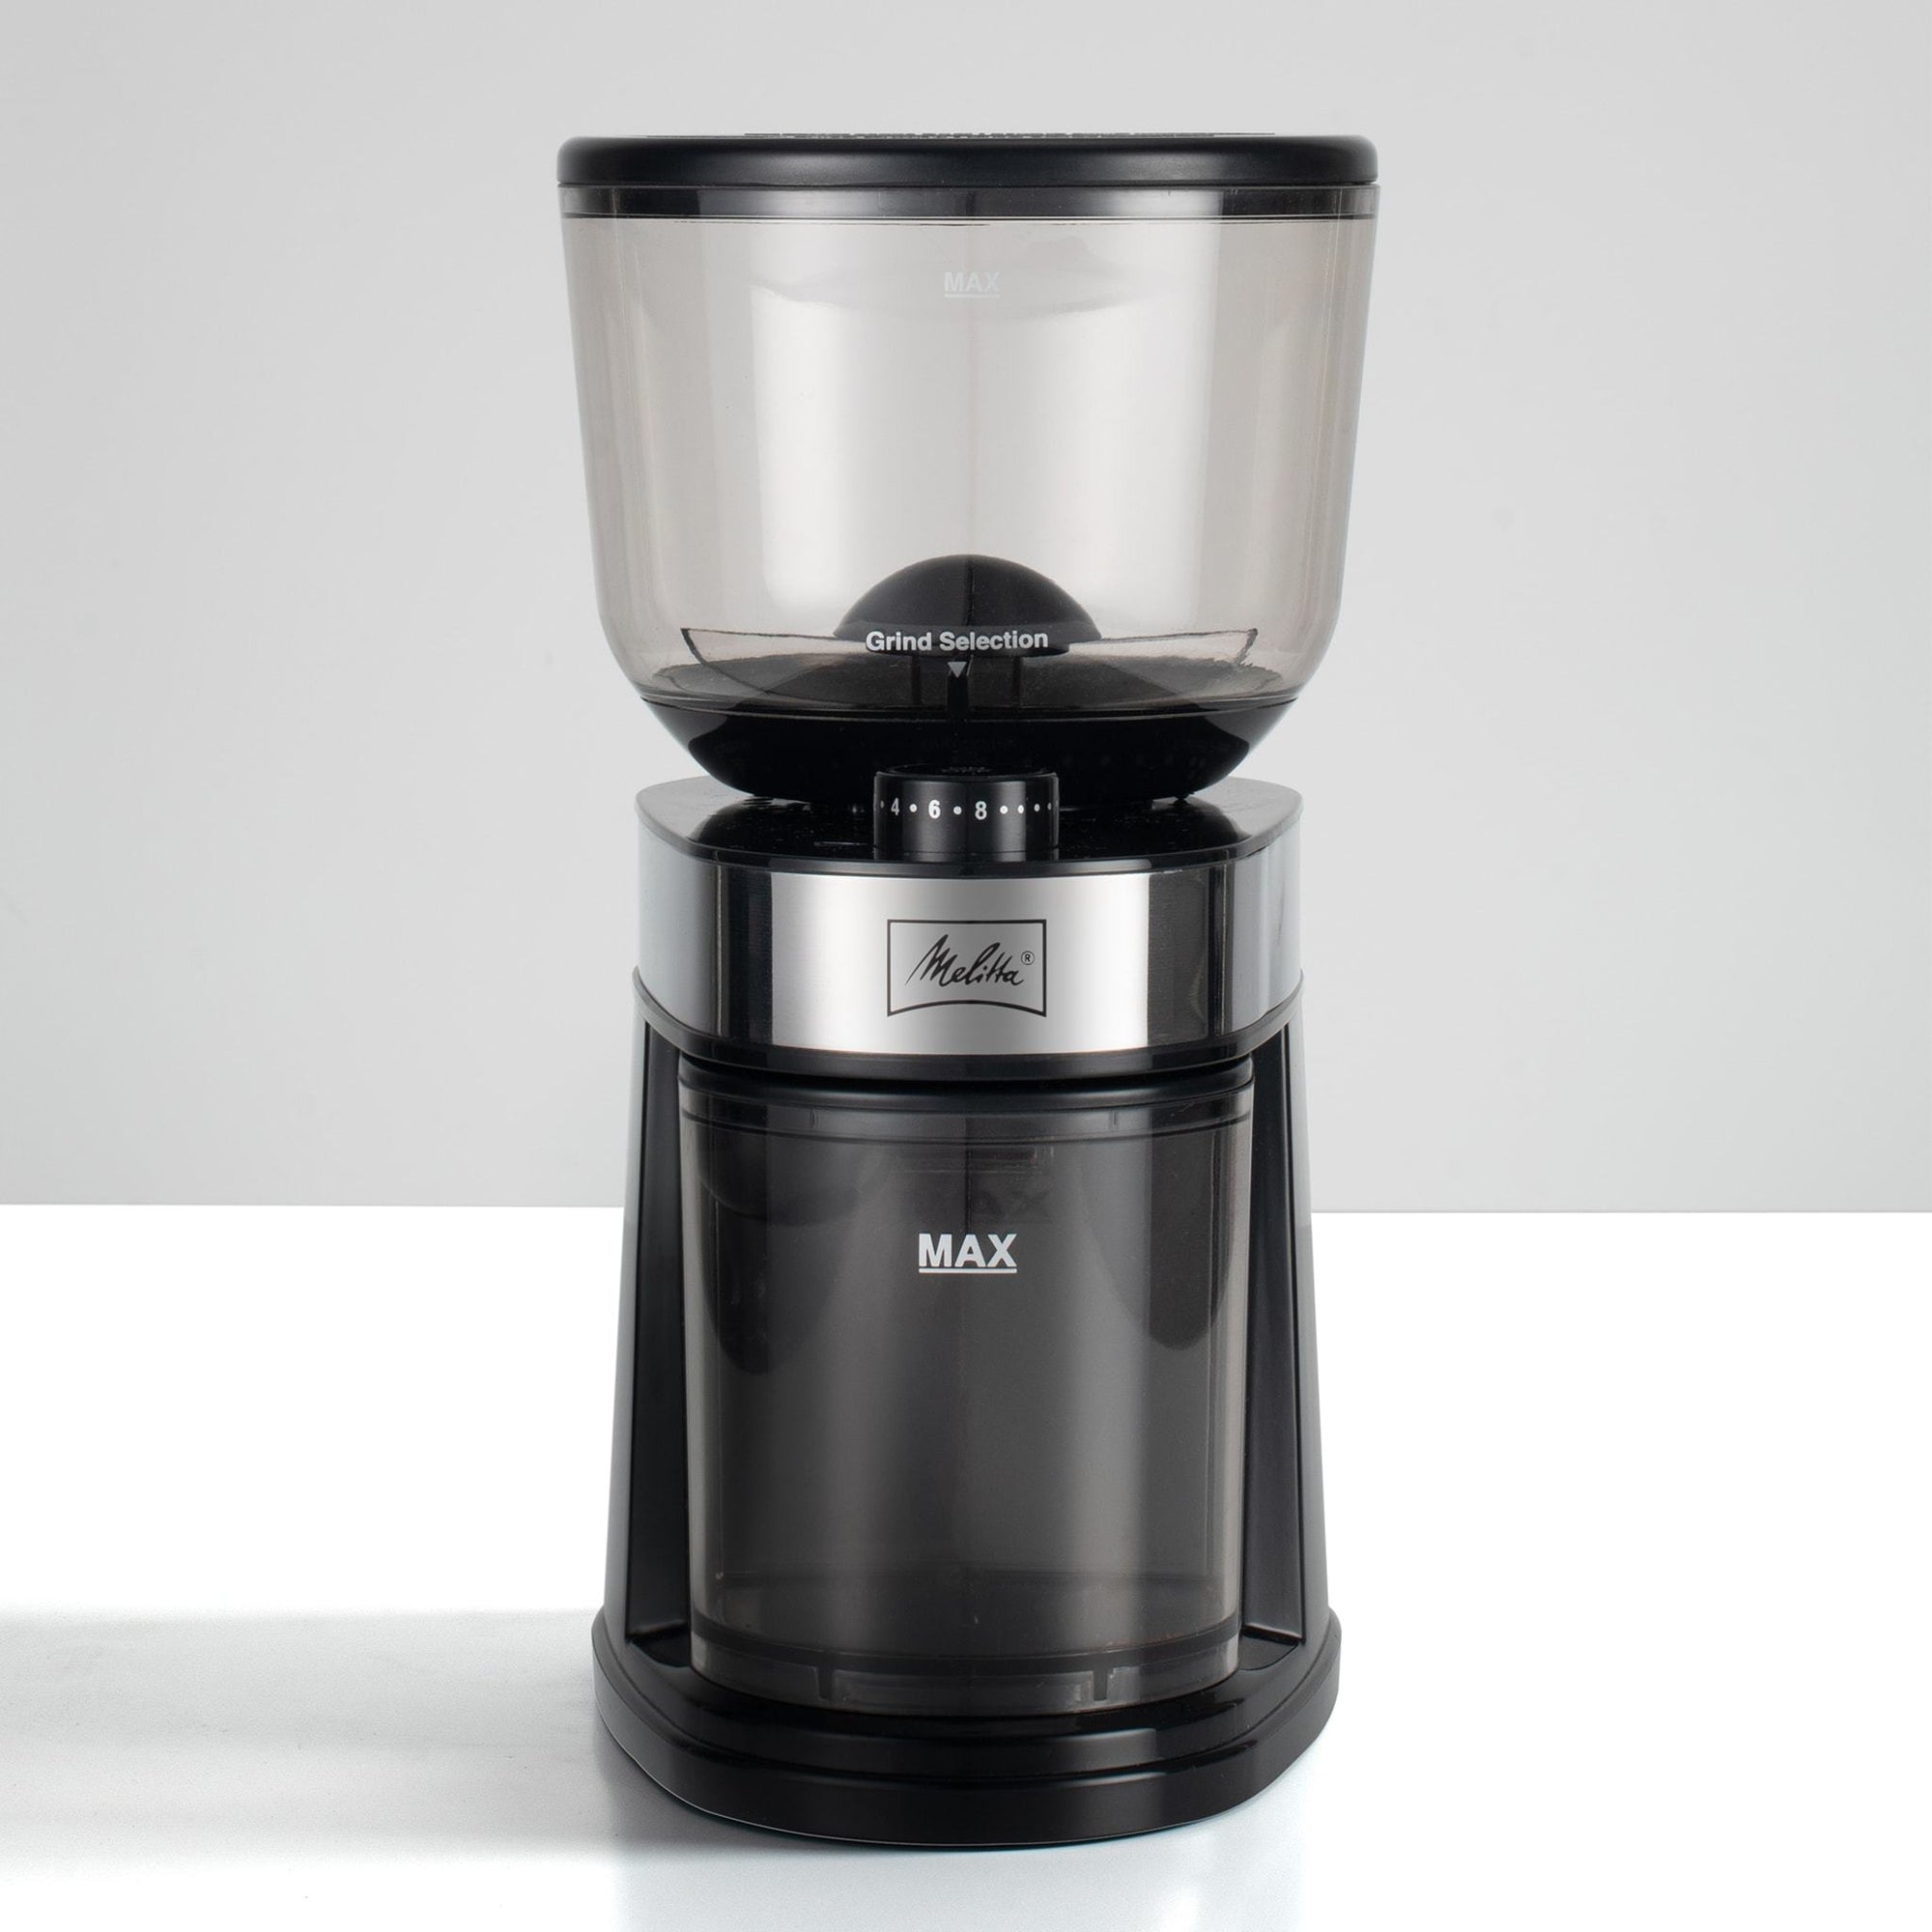 Quietest Cofffee Grinder? Better Choice for Your Home